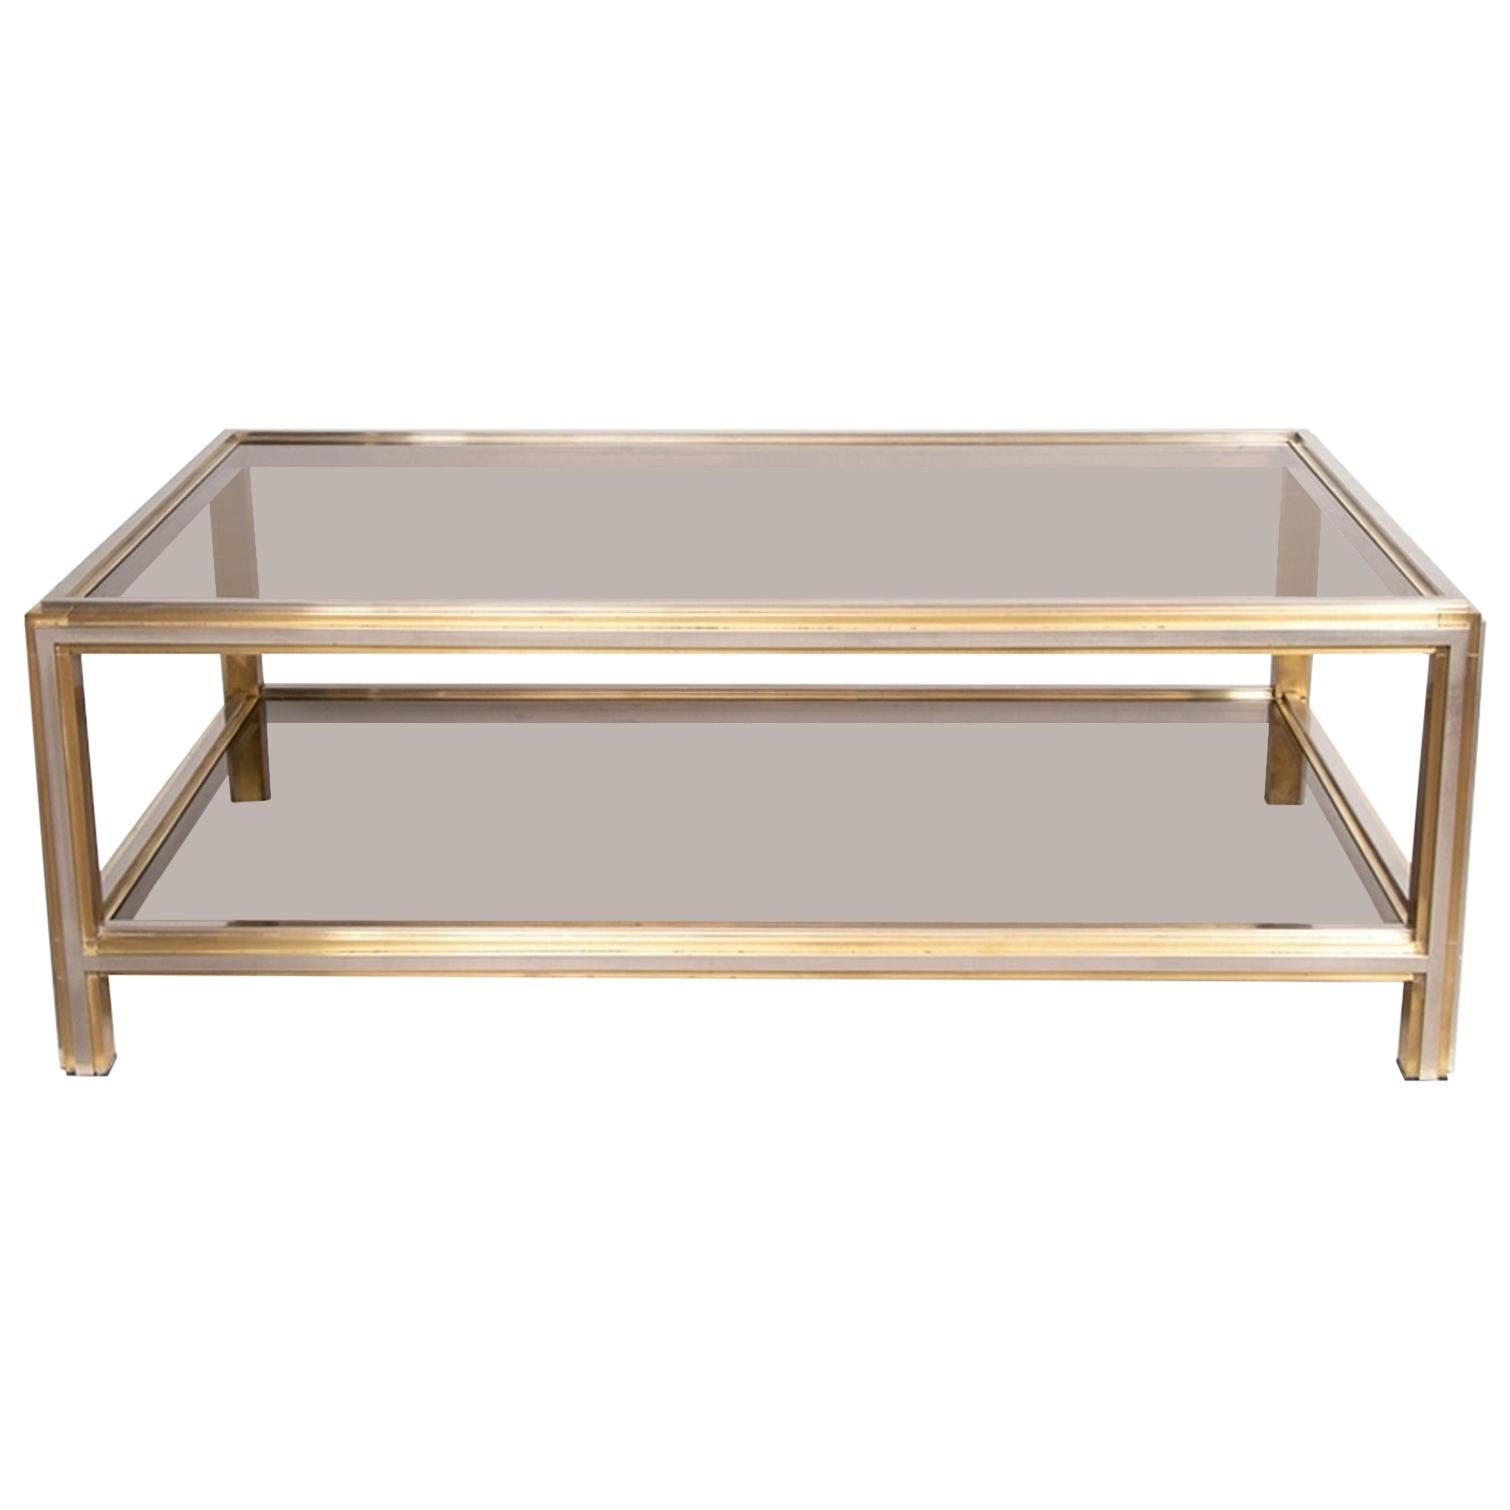 Willy Rizzo Brass & Chrome Coffee Table, c.1970 For Sale